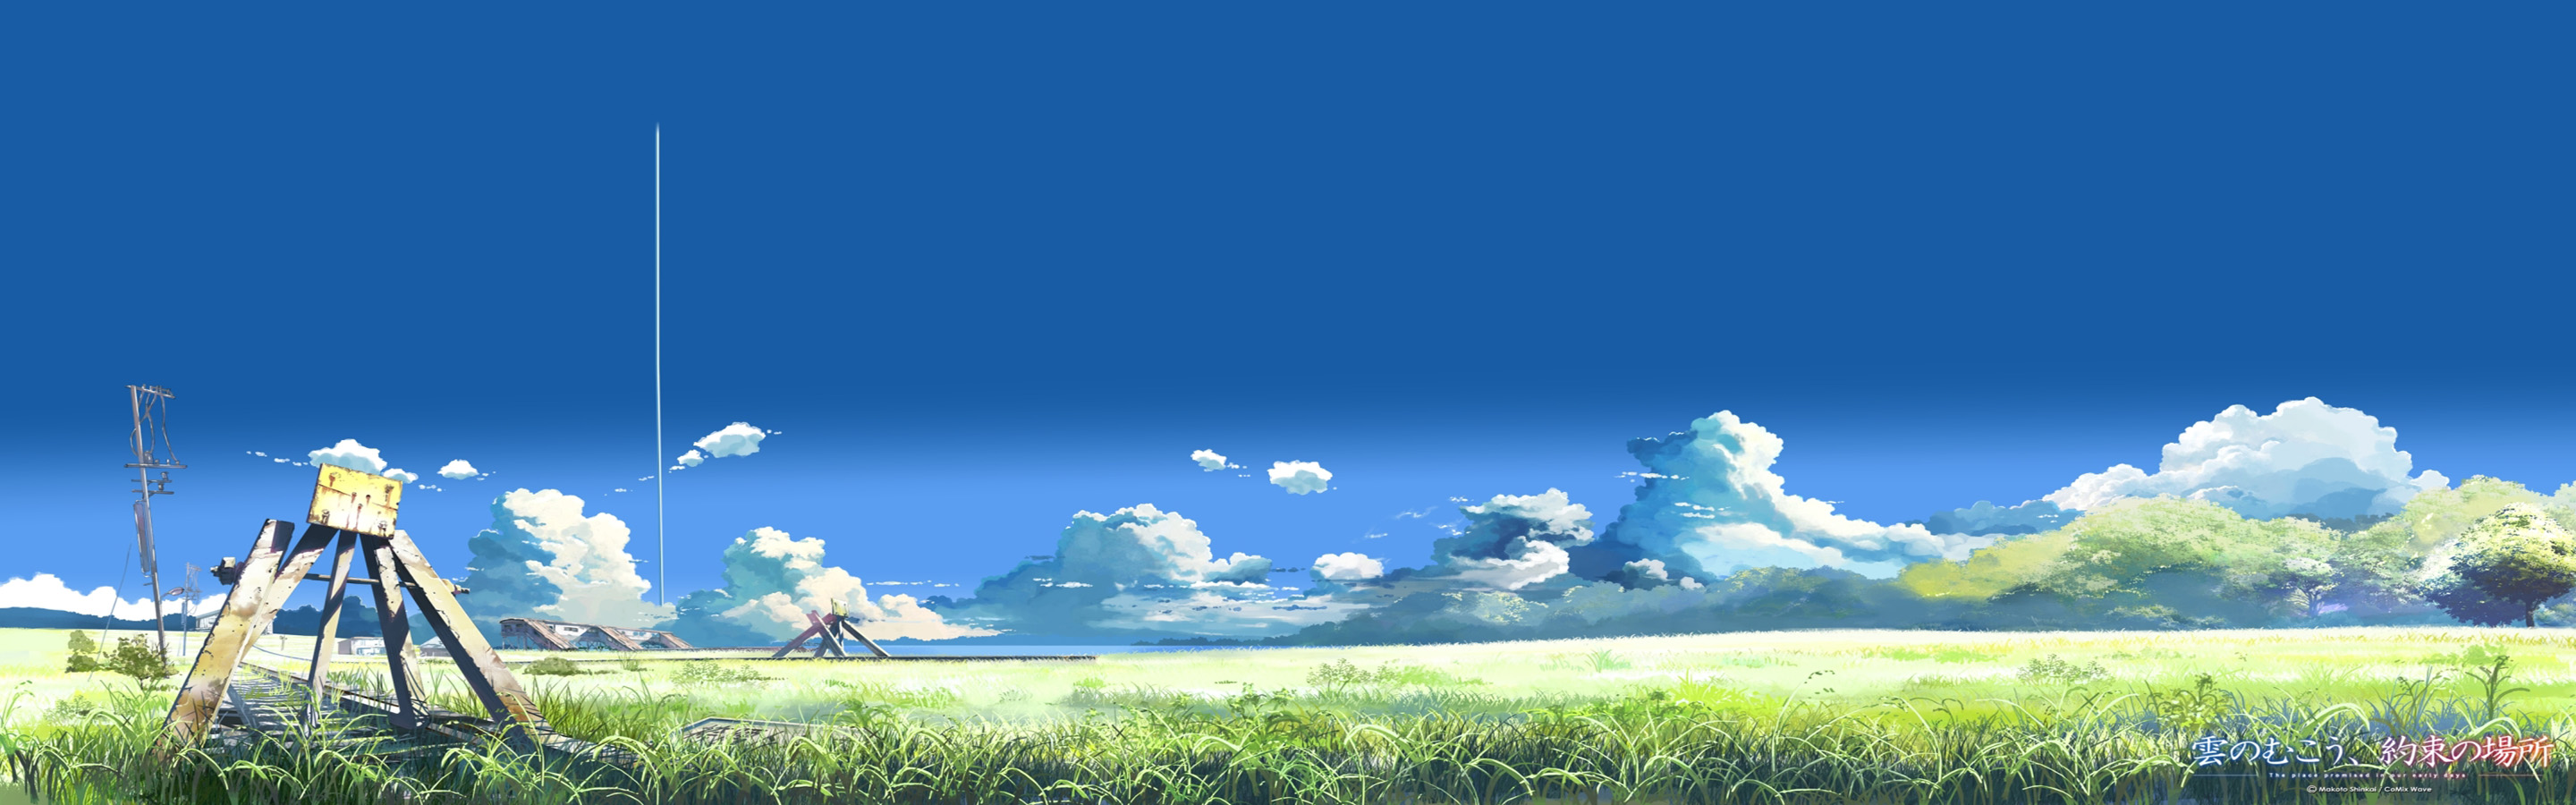 Clouds Anime Wallpaper